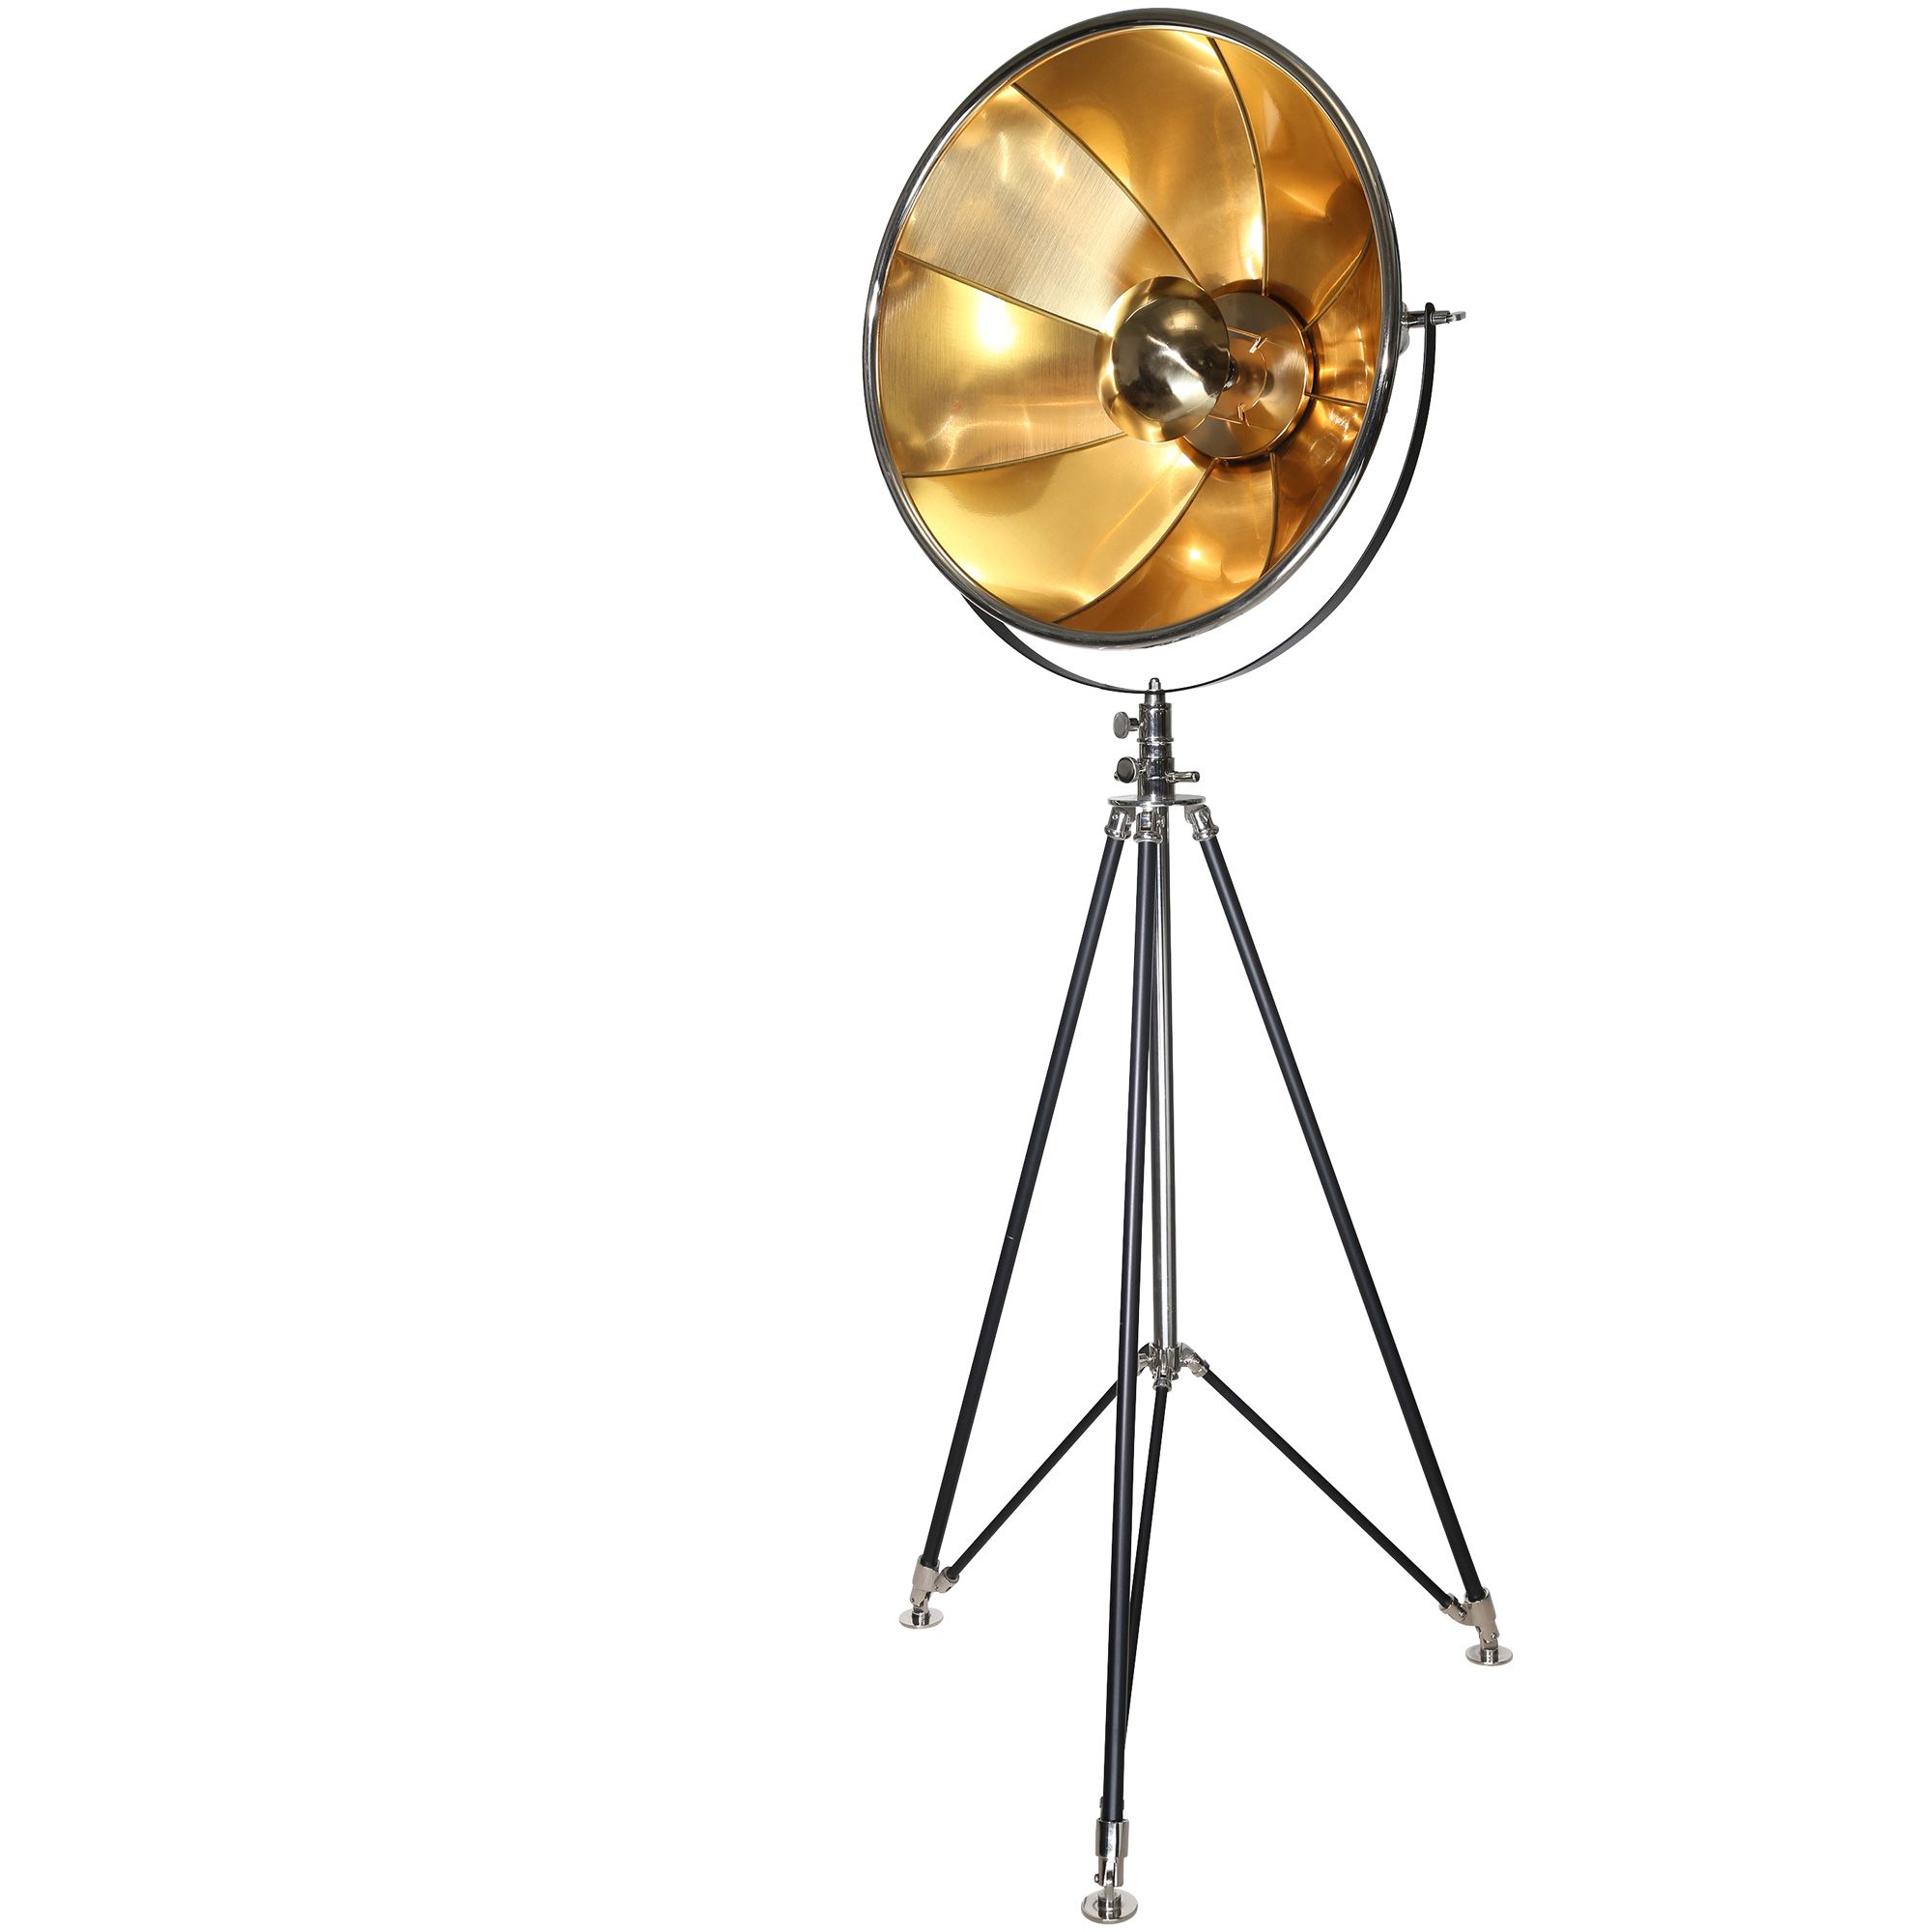 Timothy 75 Inch Gold Floor Lamp | Slumberland Furniture Intended For 75 Inch Floor Lamps (View 13 of 20)